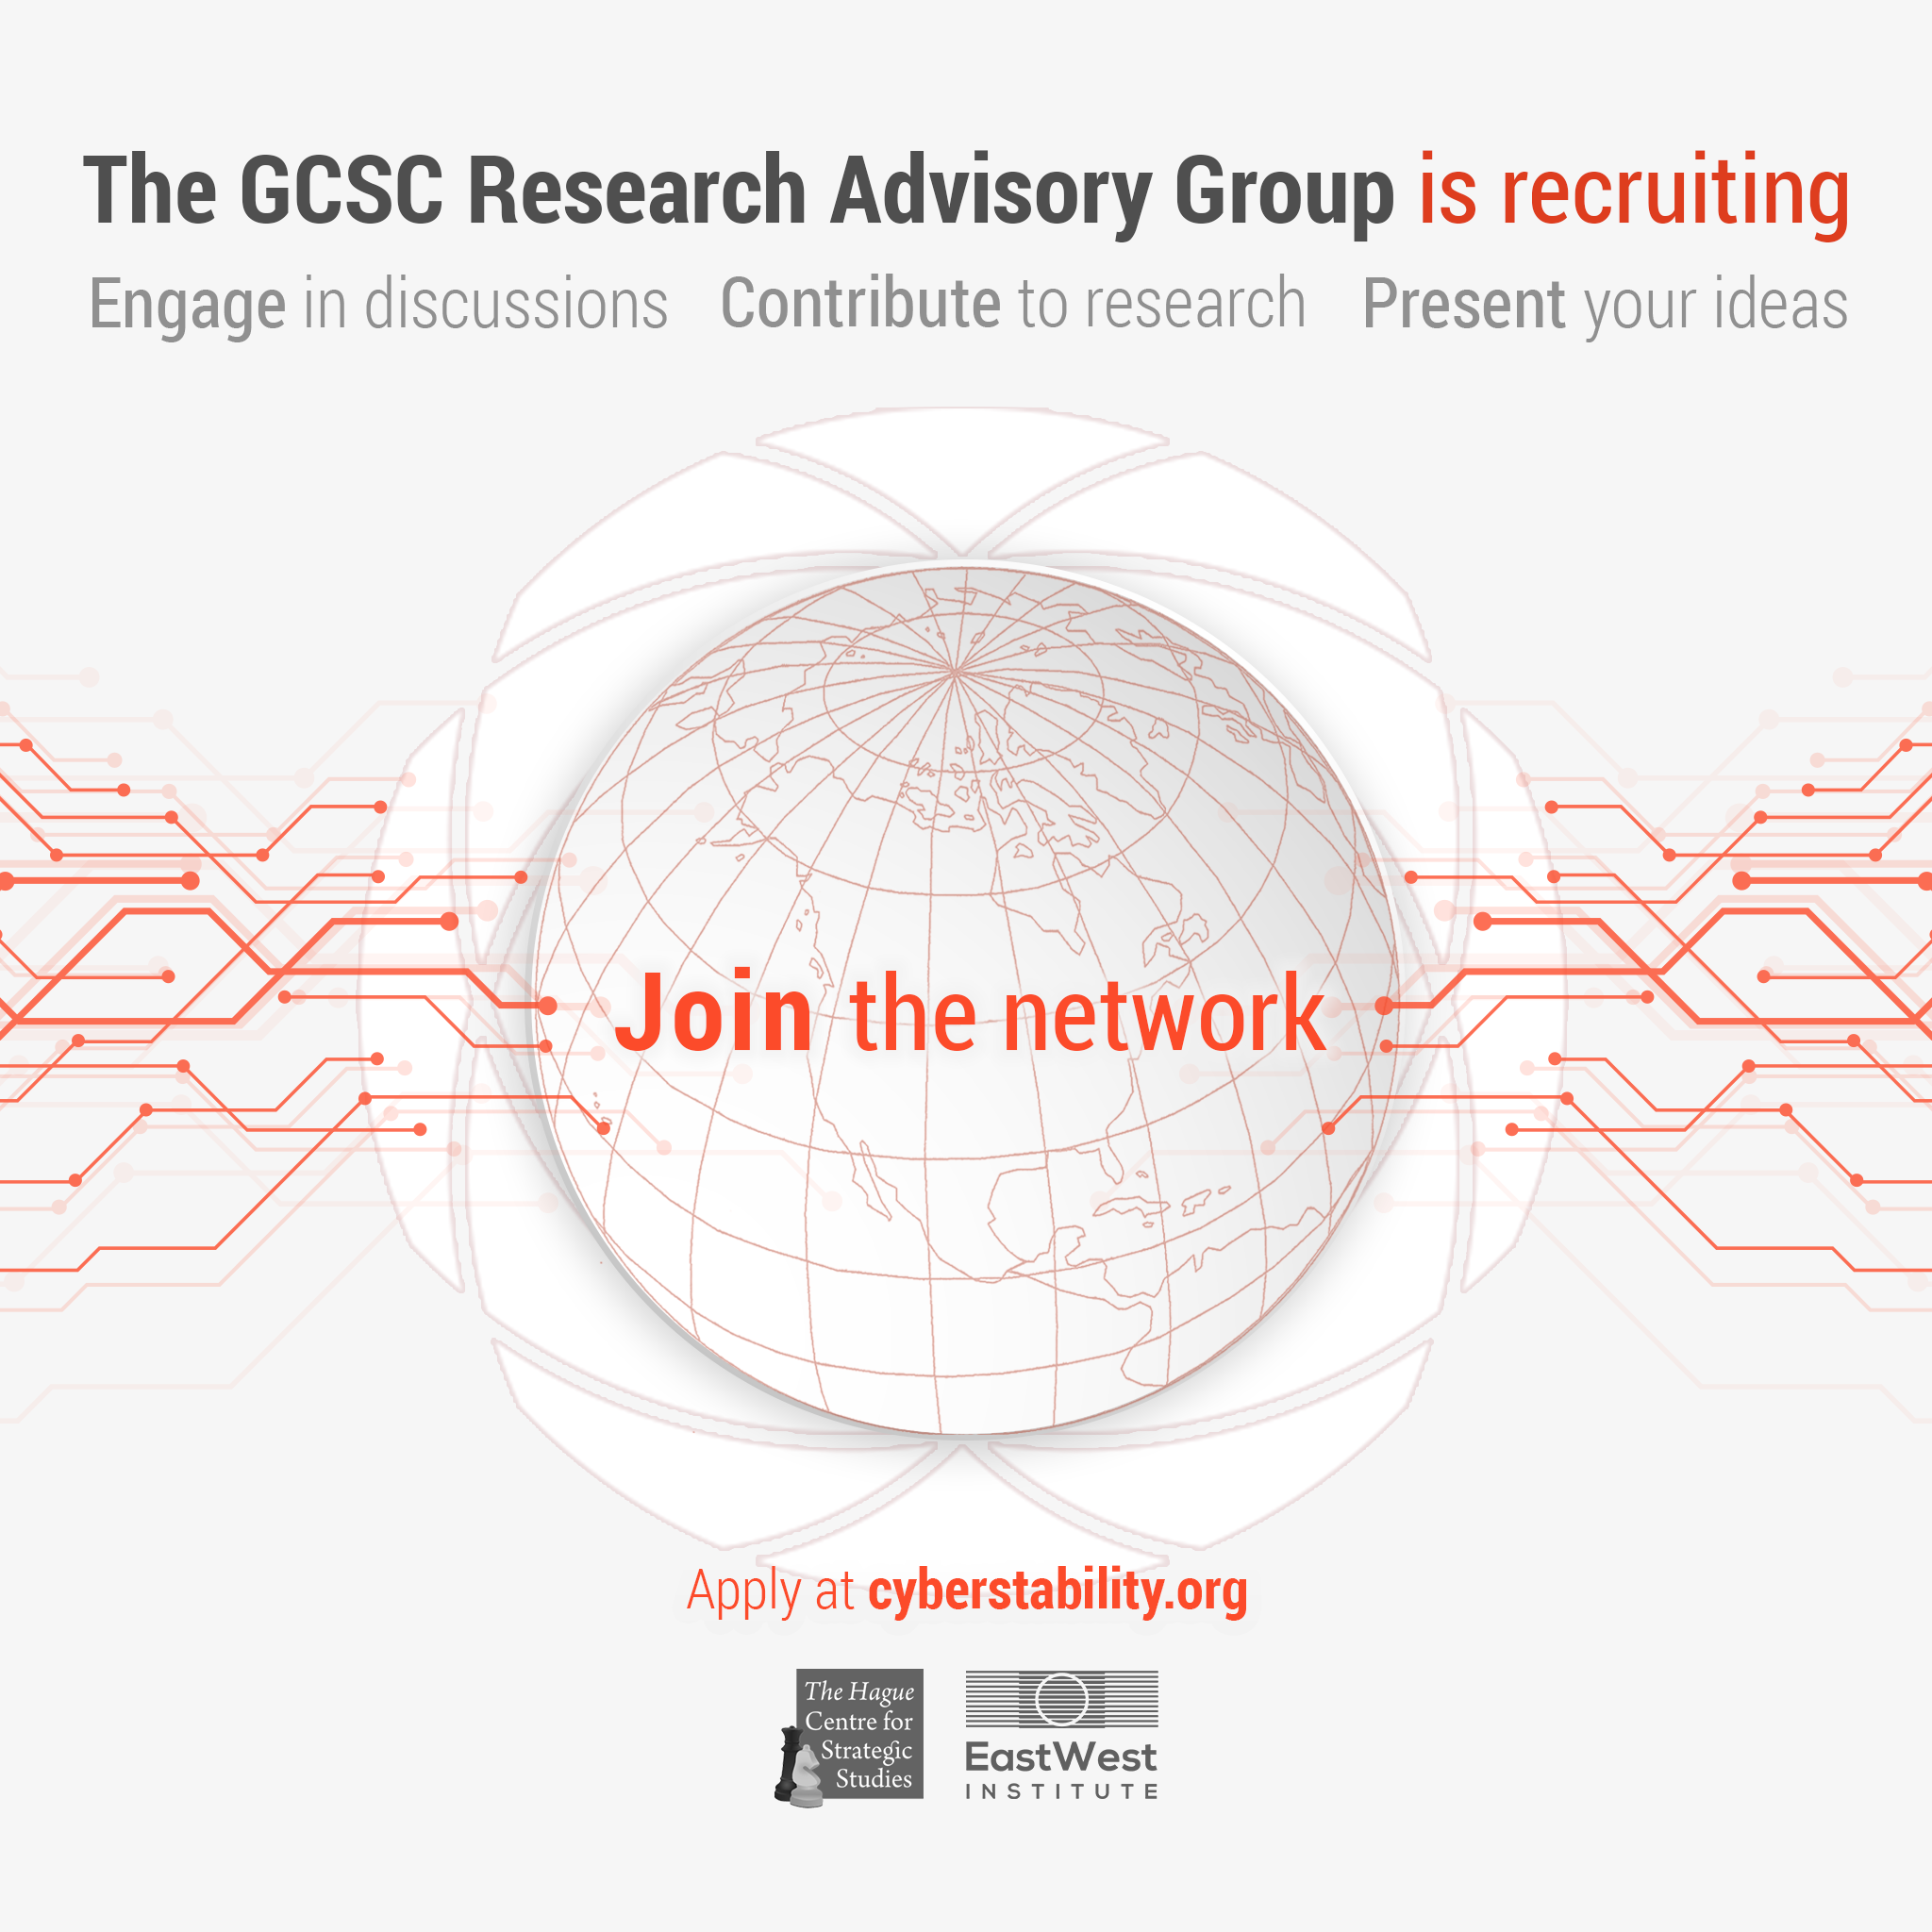 The GCSC Research Advisory Group is recruiting2